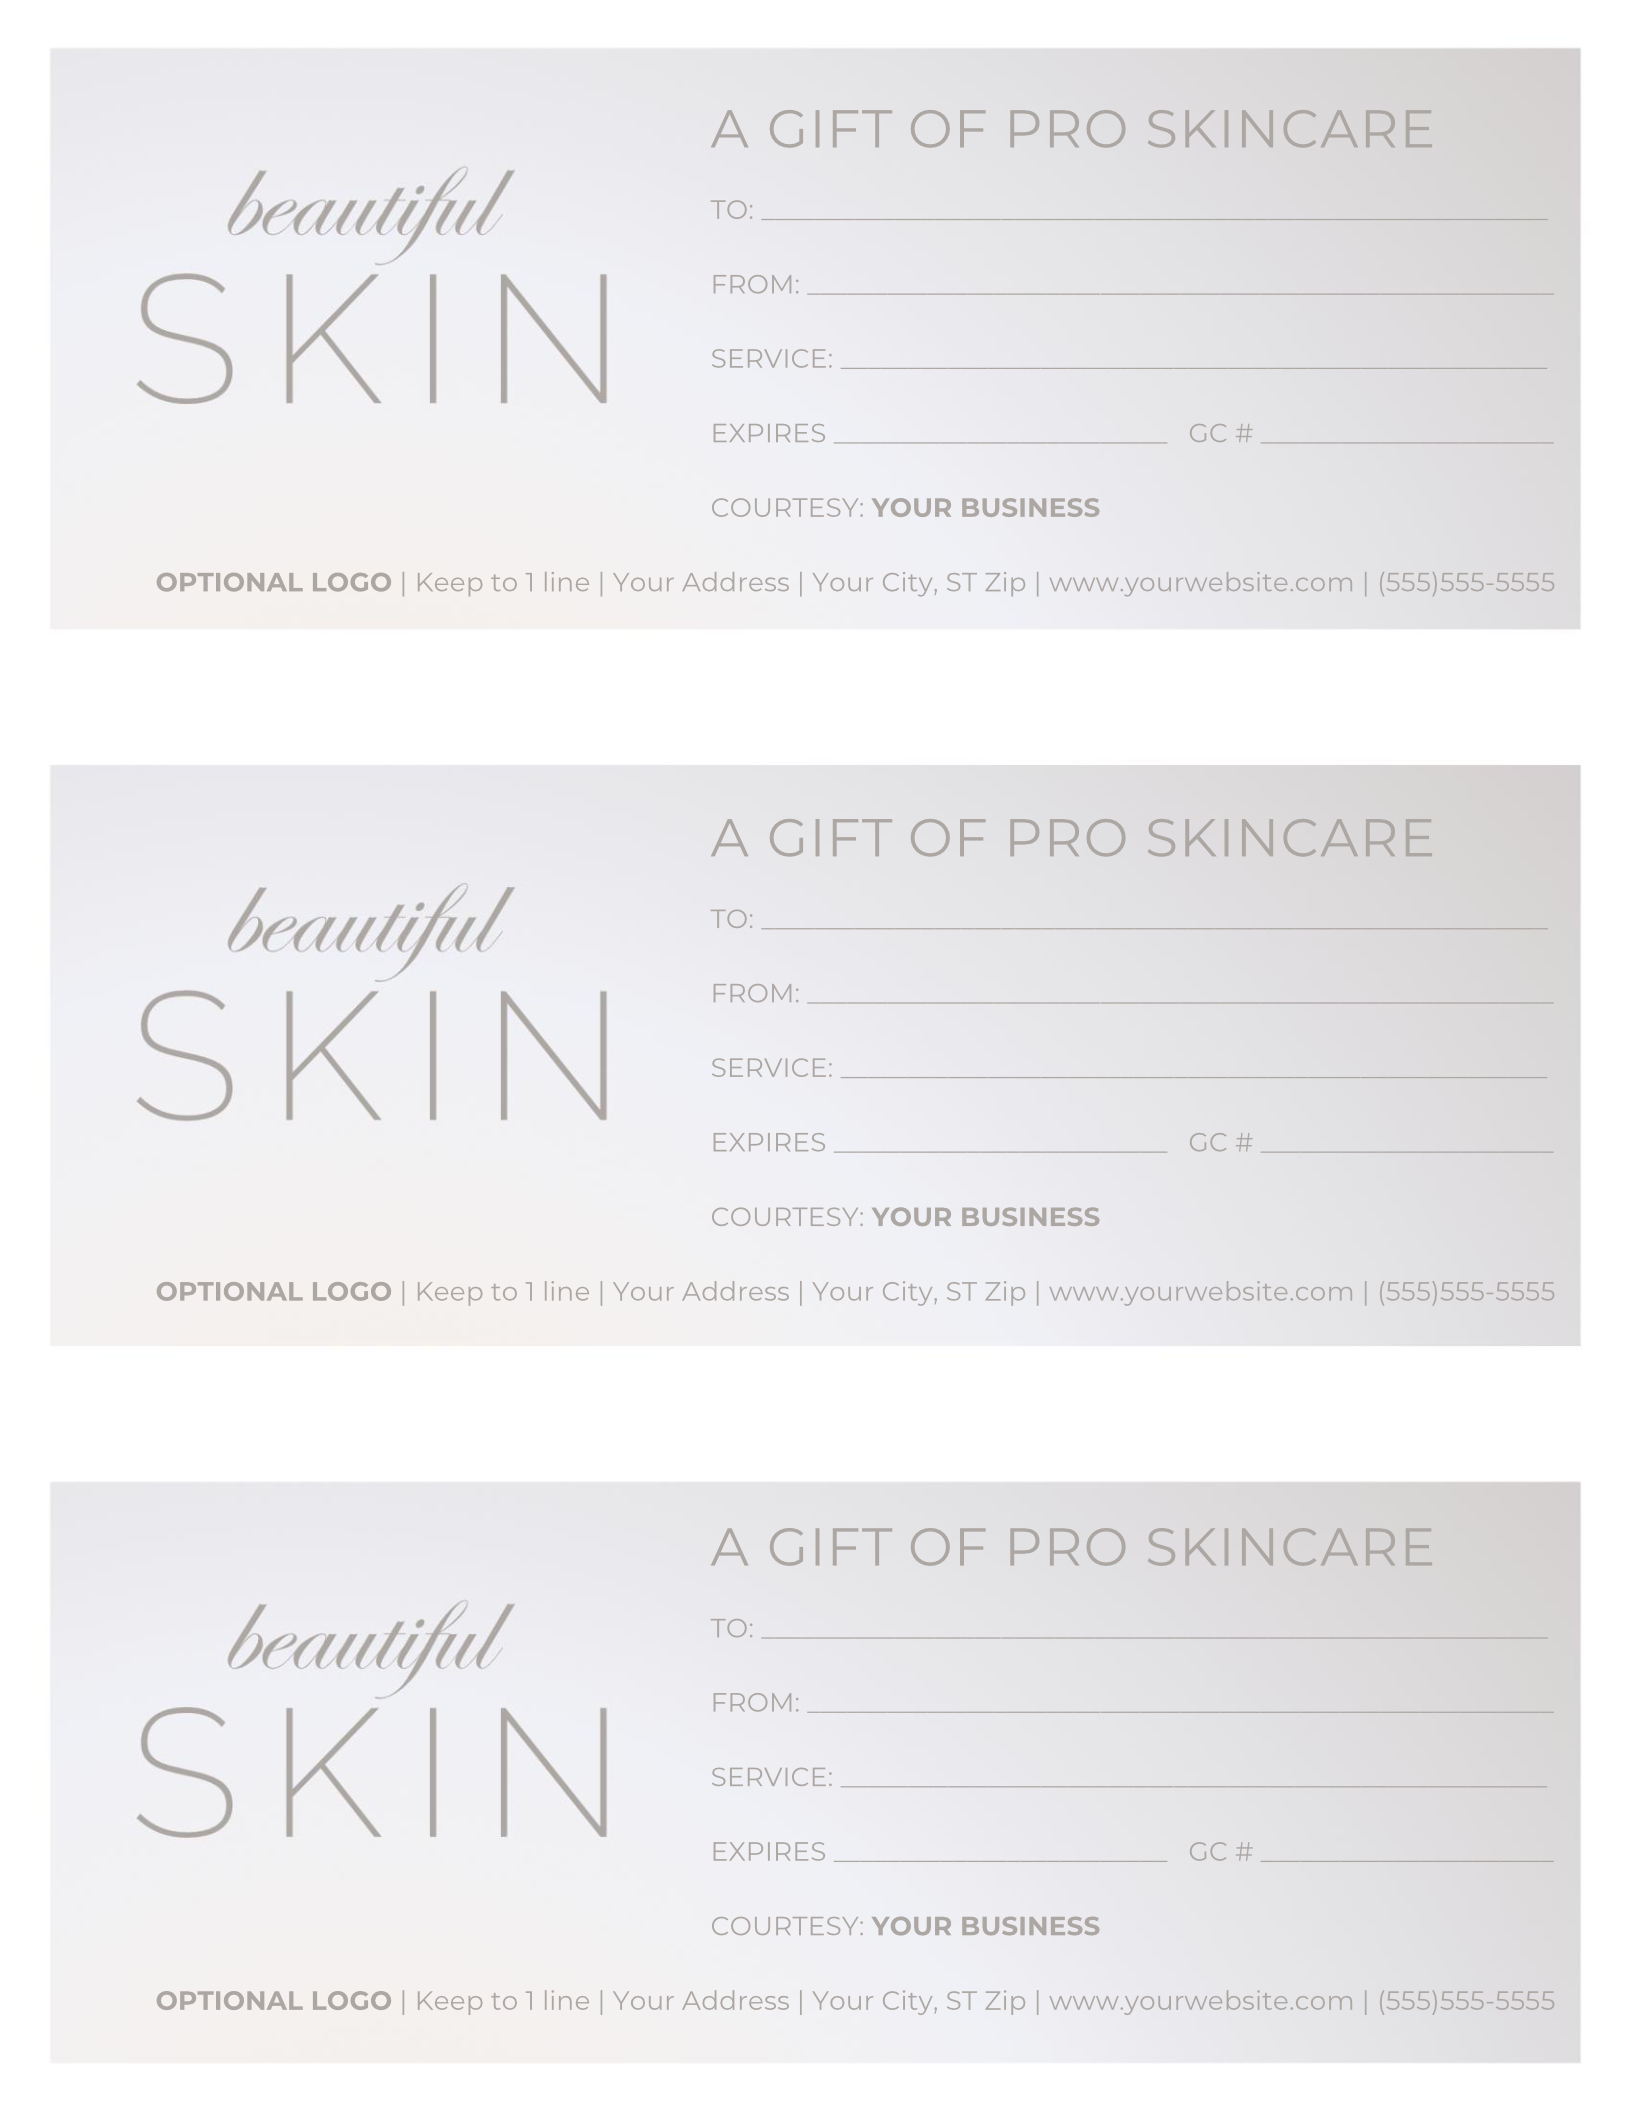 Free Gift Certificate Templates For Massage And Spa Pertaining To Gift Certificate Log Template